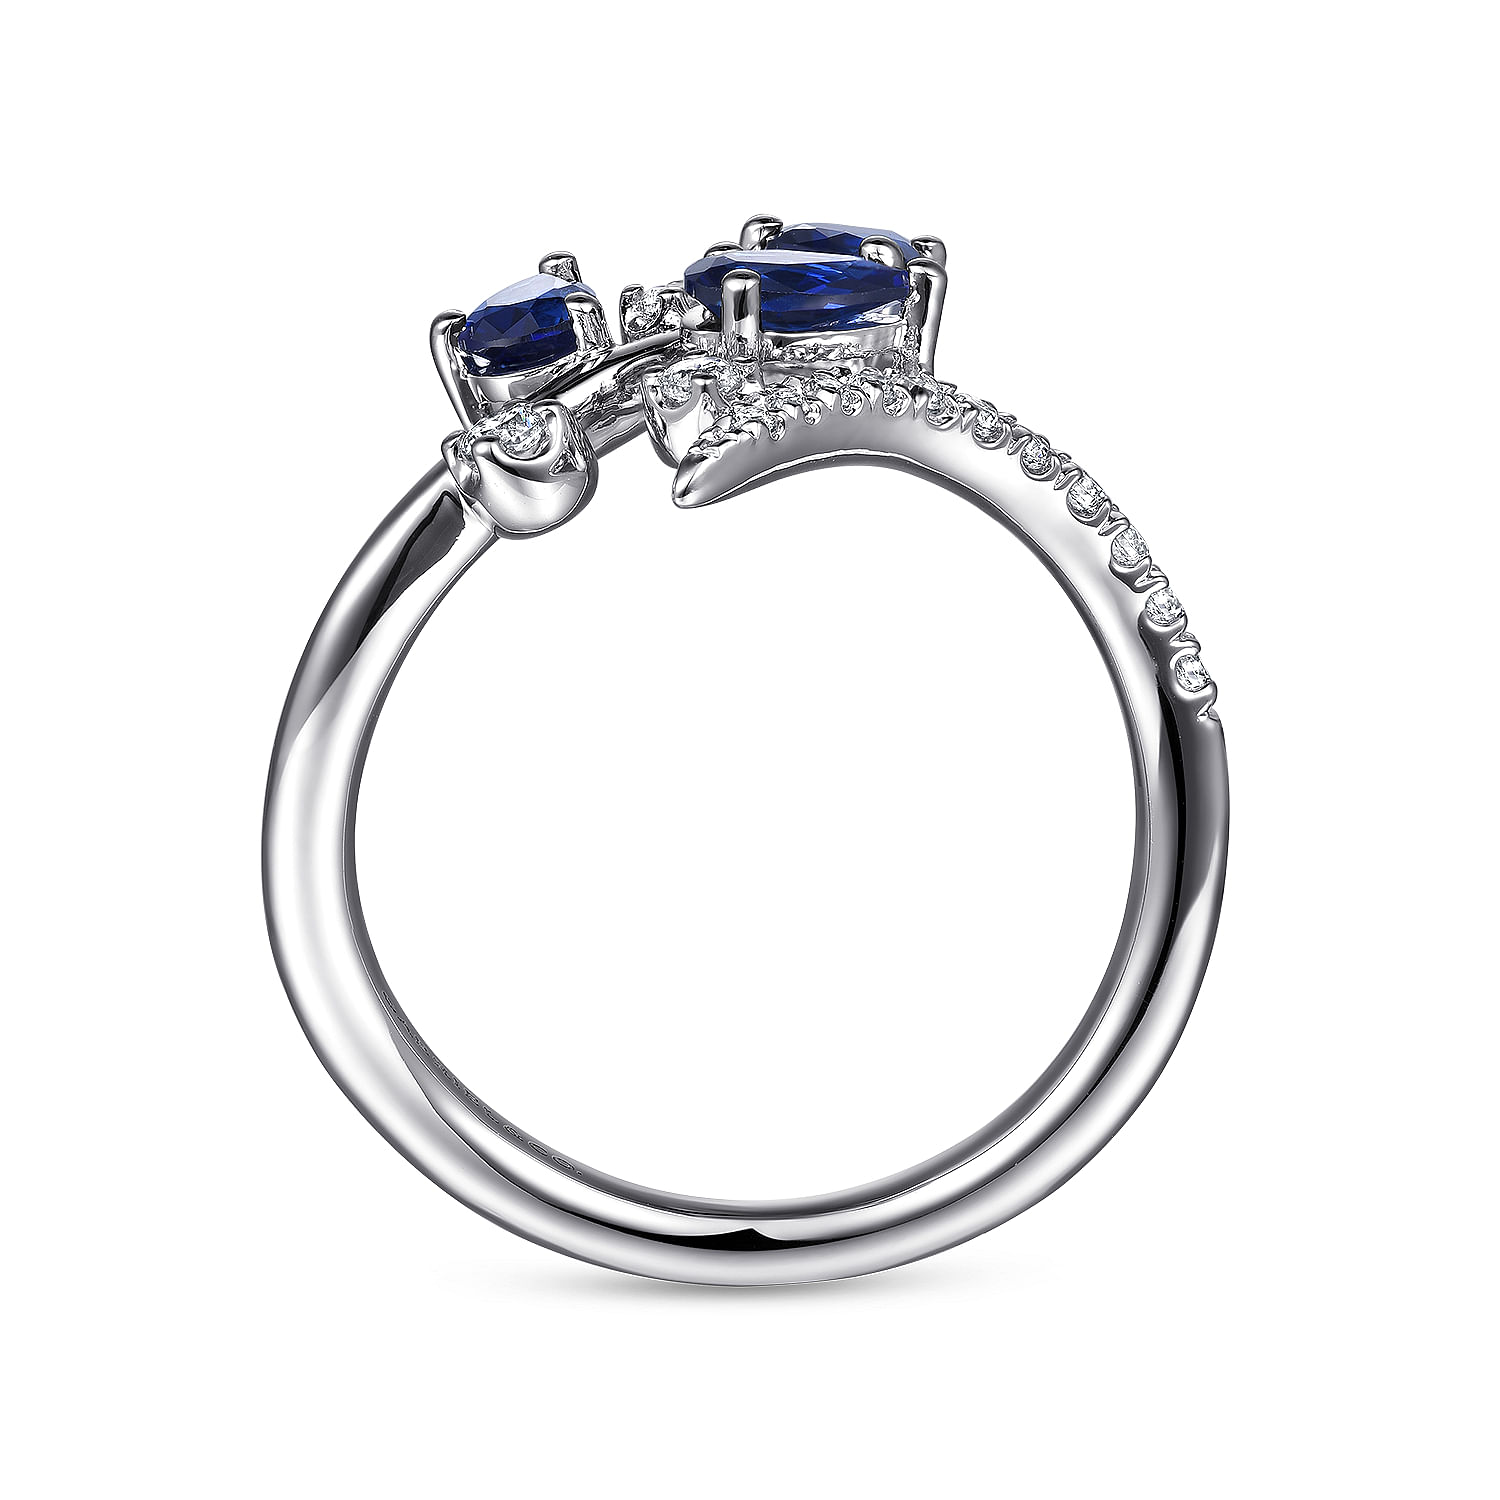 14K White Gold Diamond and Blue Sapphire Bypass Floral Ring